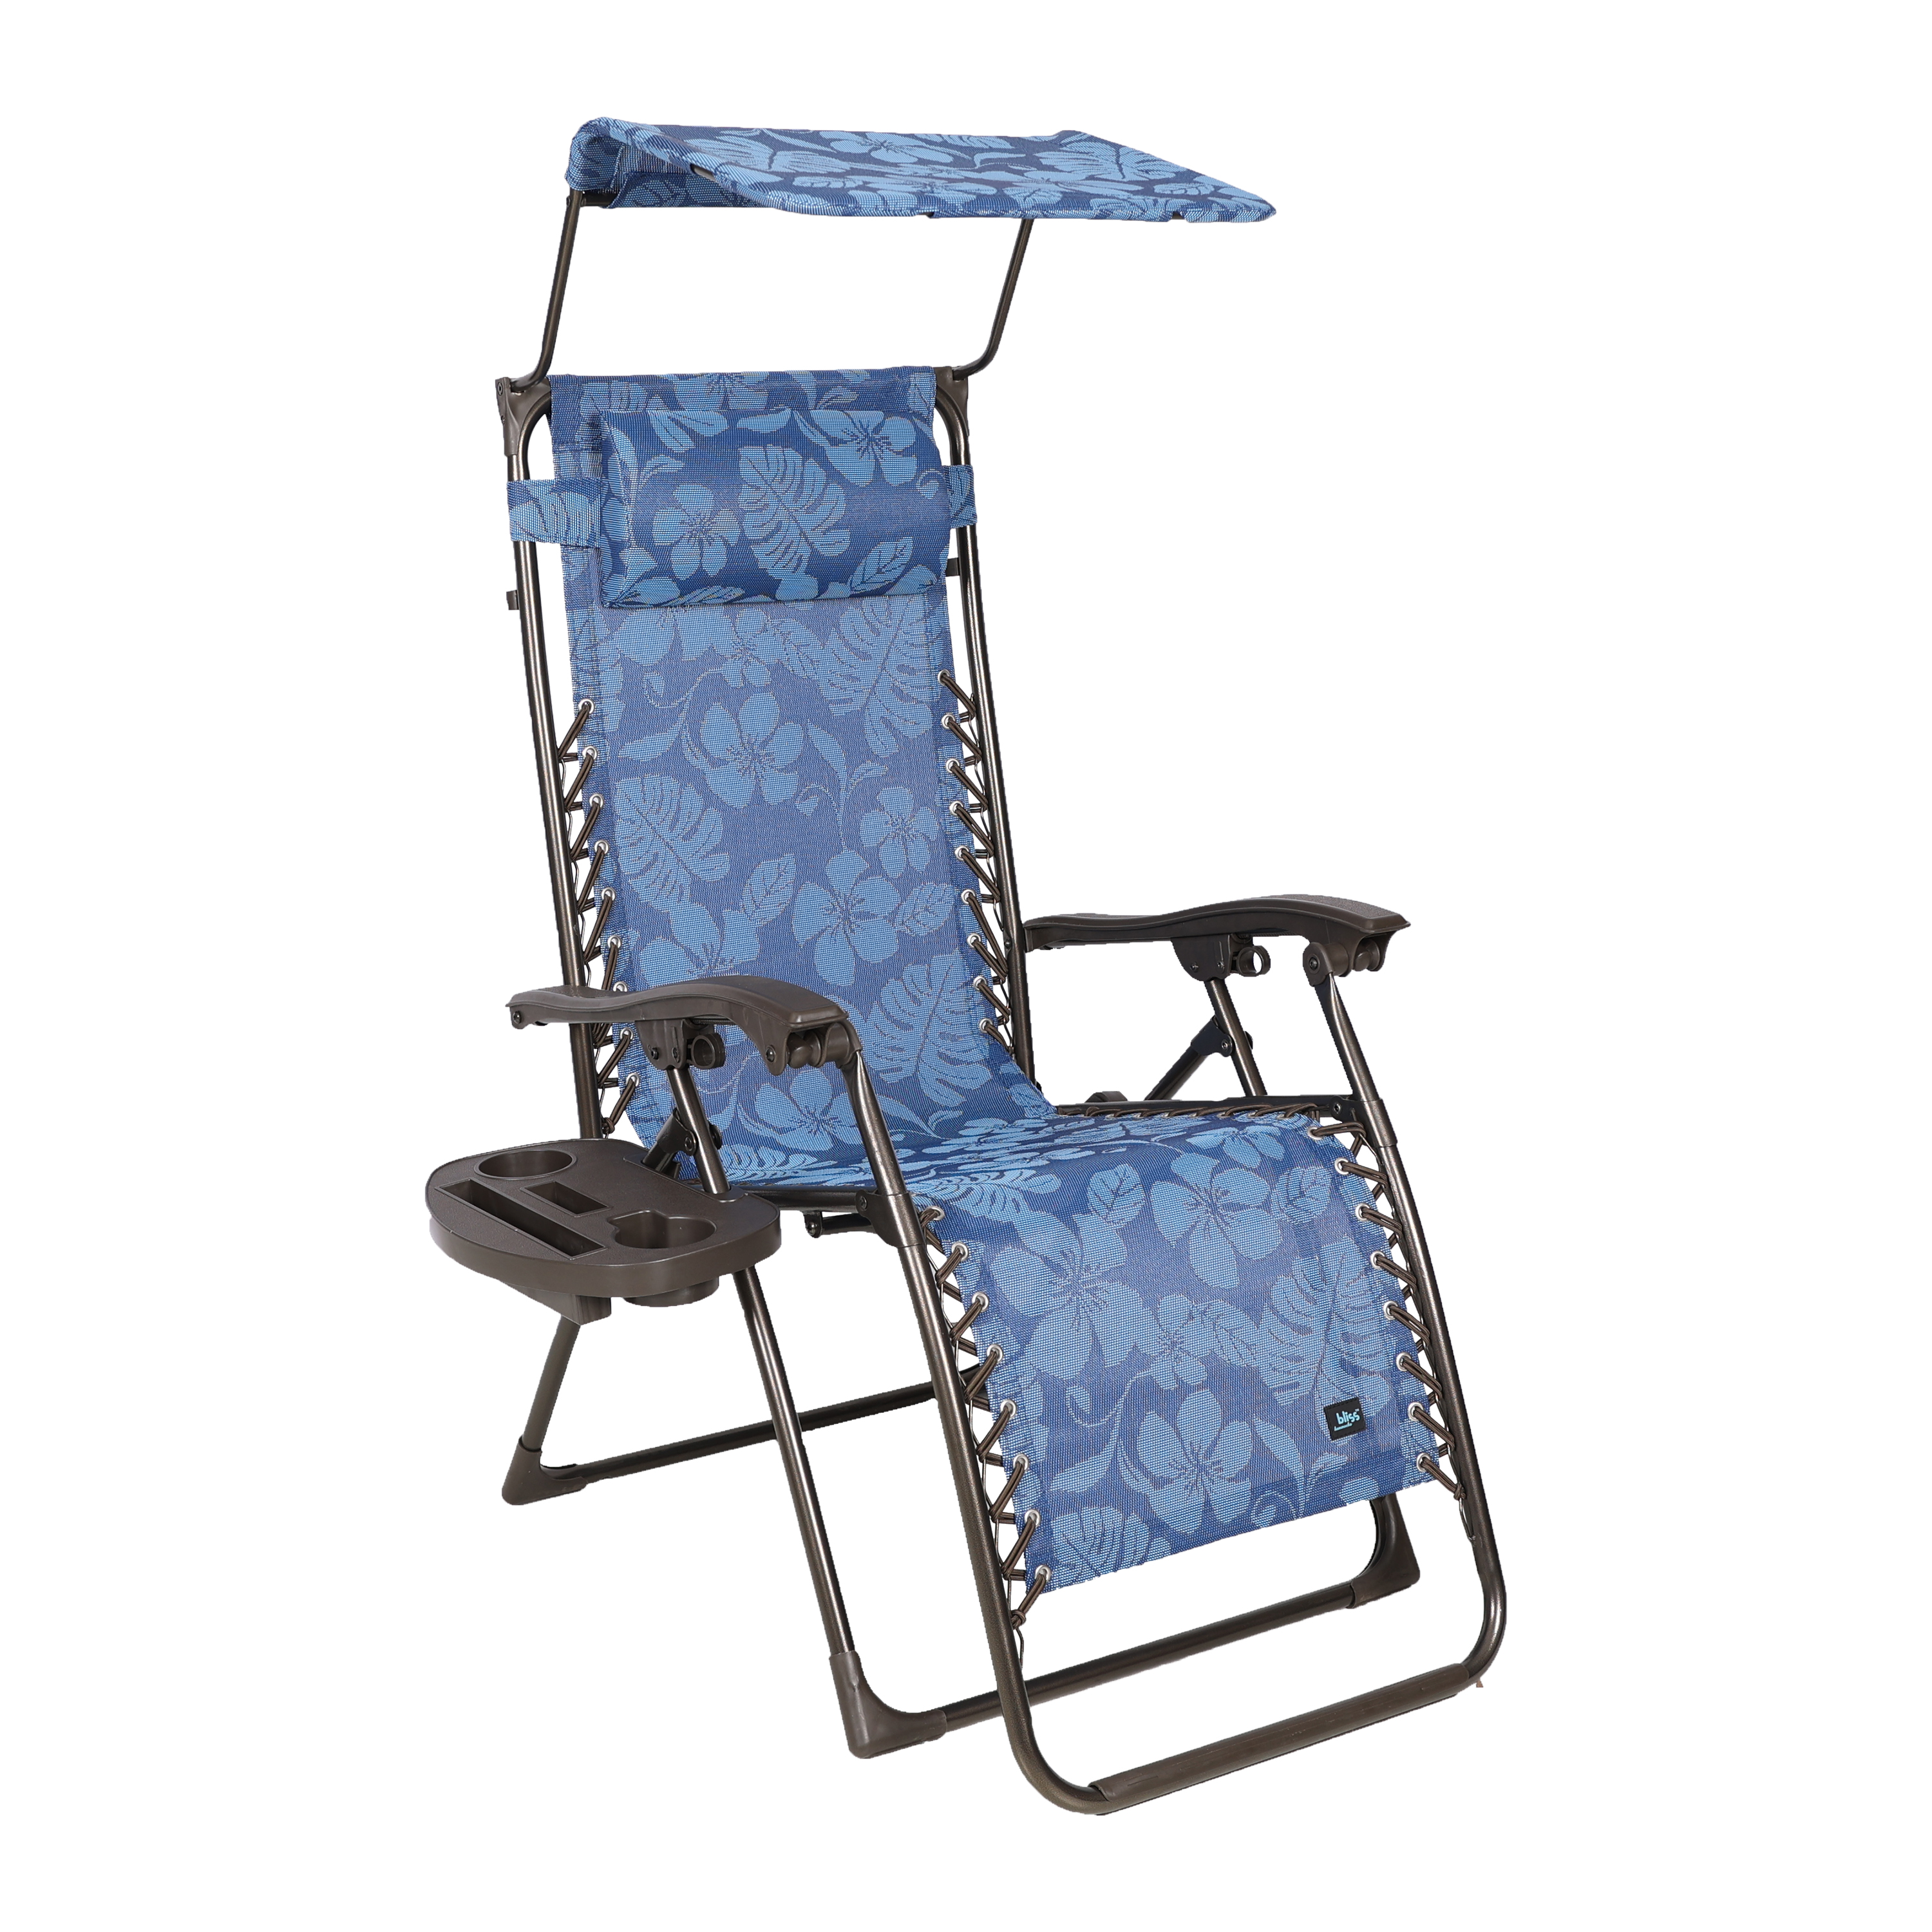 Bliss Hammocks 26-in Wide Zero Gravity Chair w/ Adjustable Canopy Sun-Shade, Drink Tray, & Adjustable Pillow, 300 Lbs Capacity (Blue Flowers) - image 1 of 3